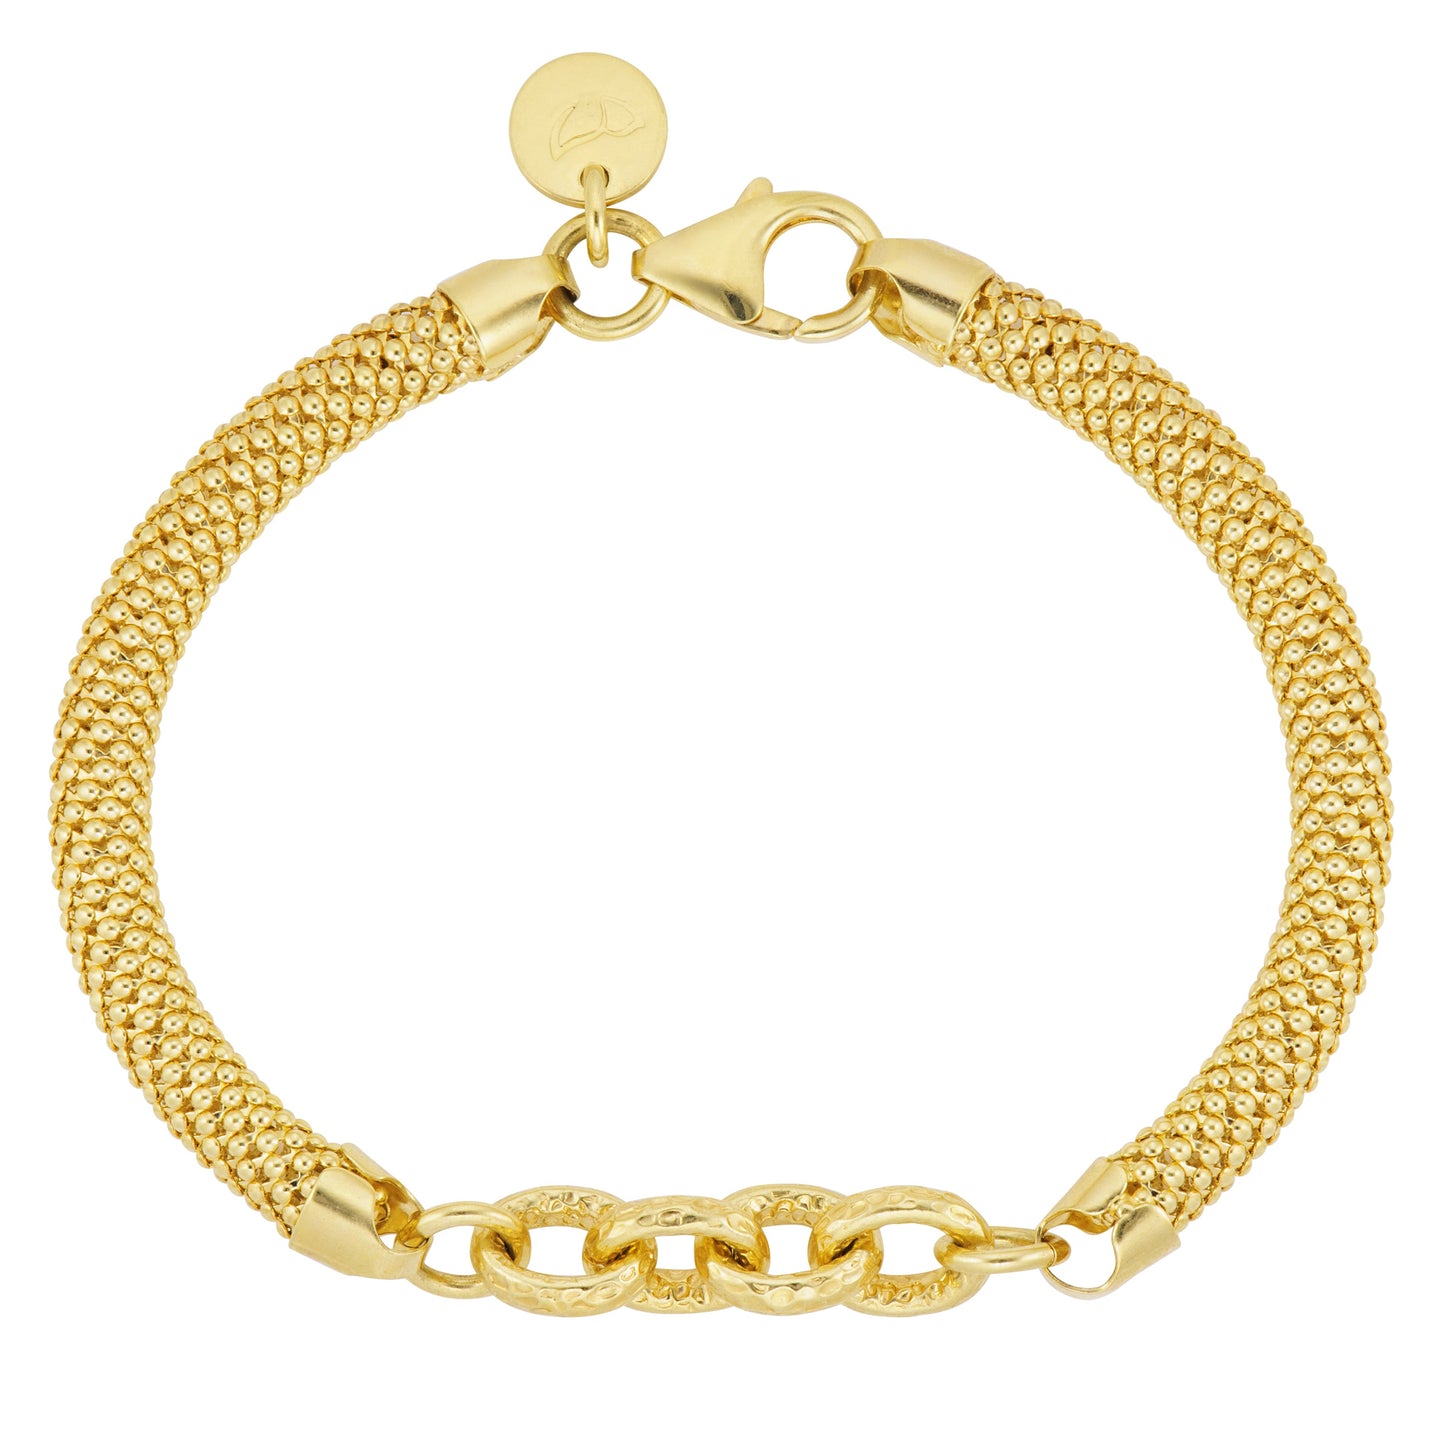 8" Popcorn Chain Bracelet with Link Top